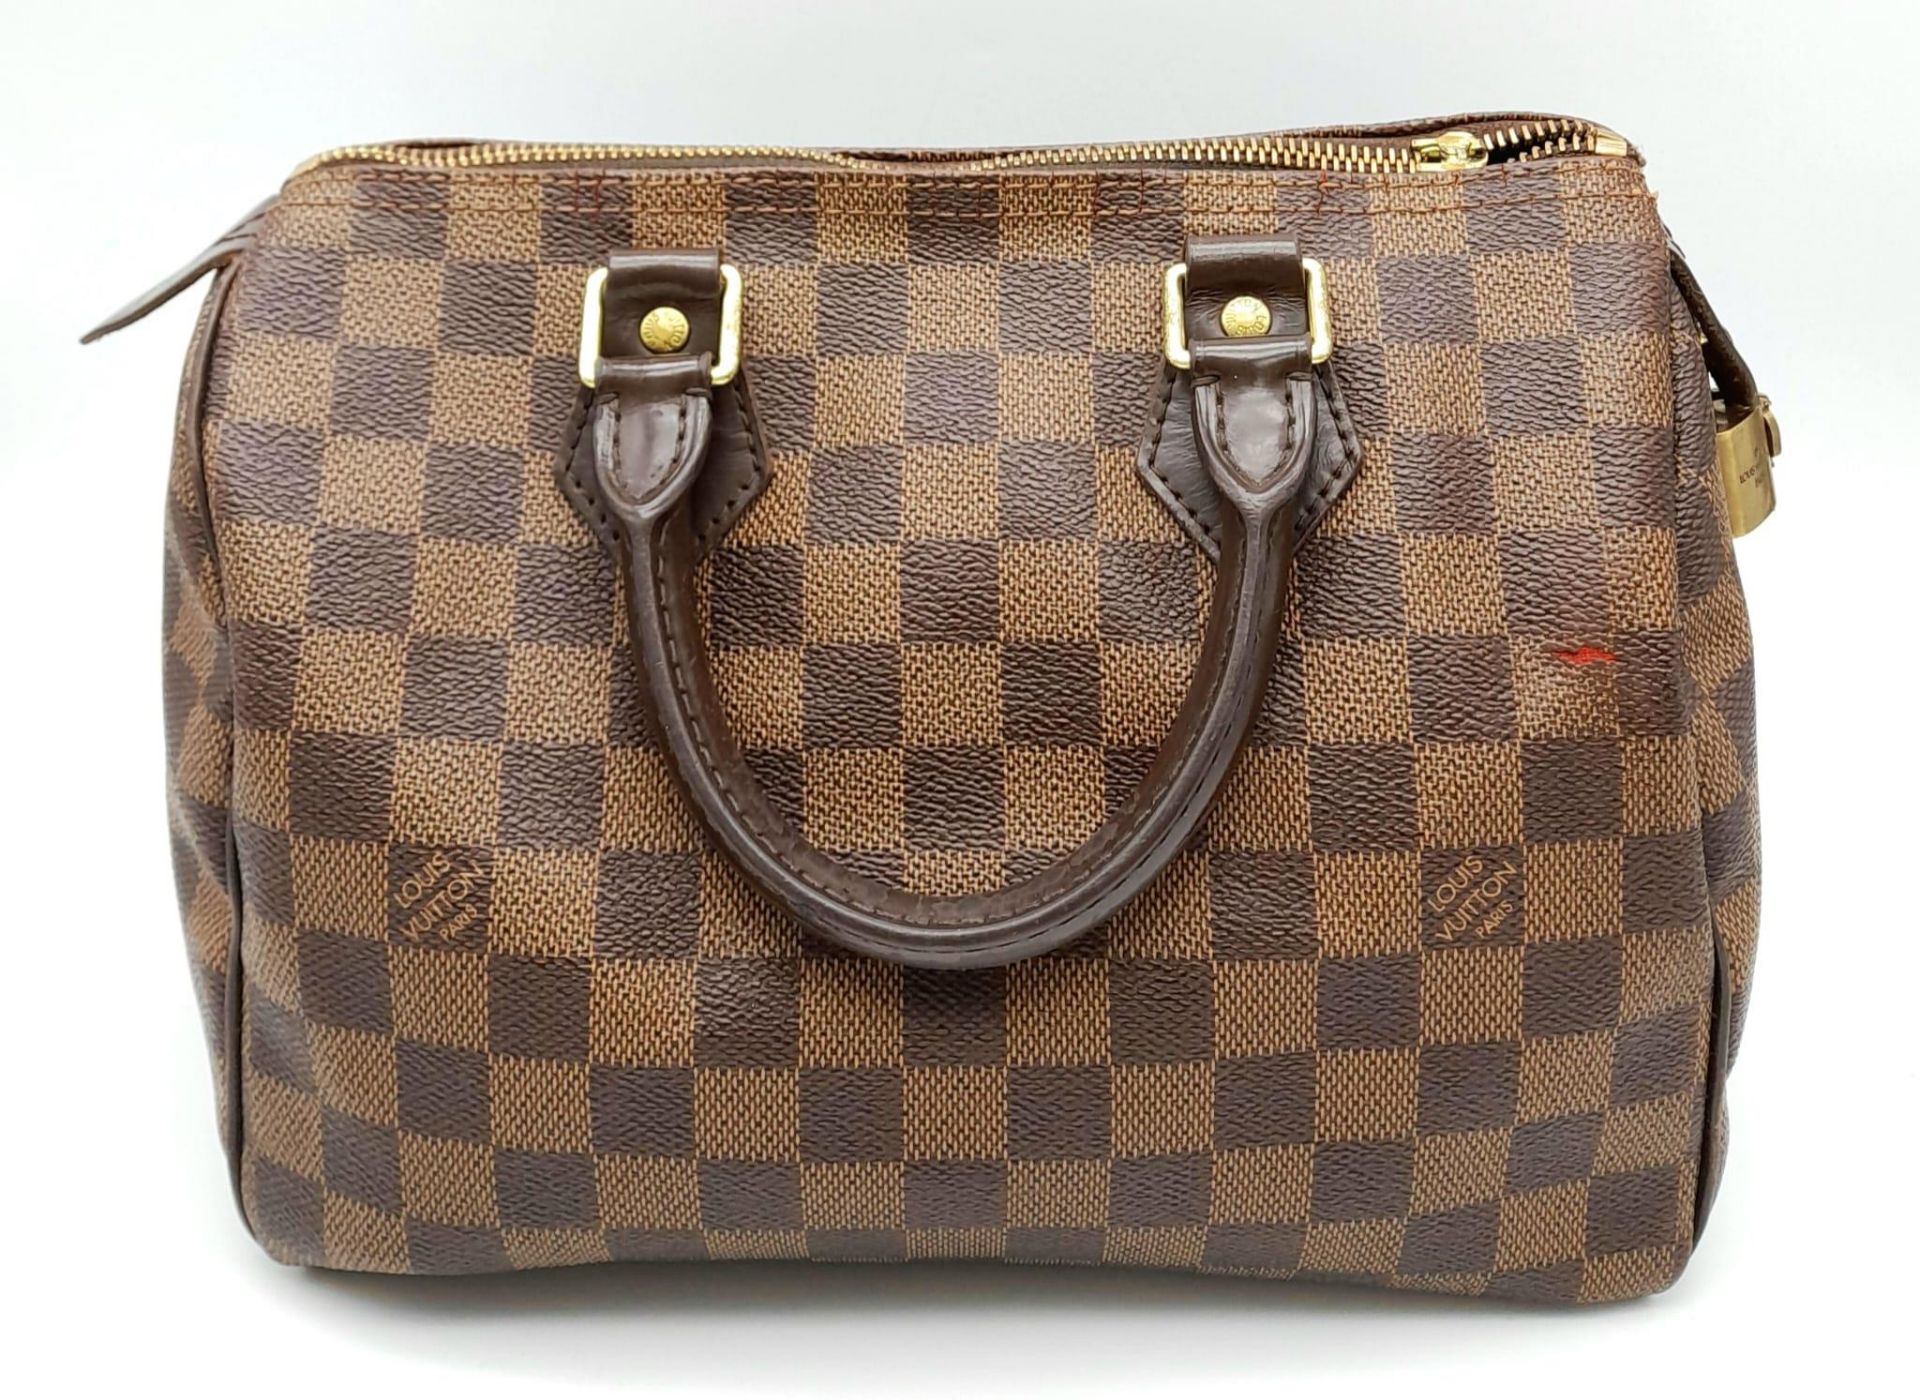 A Louis Vuitton Speedy Bag. LV canvas with brown leather trim and handles. Lock with keys. Red